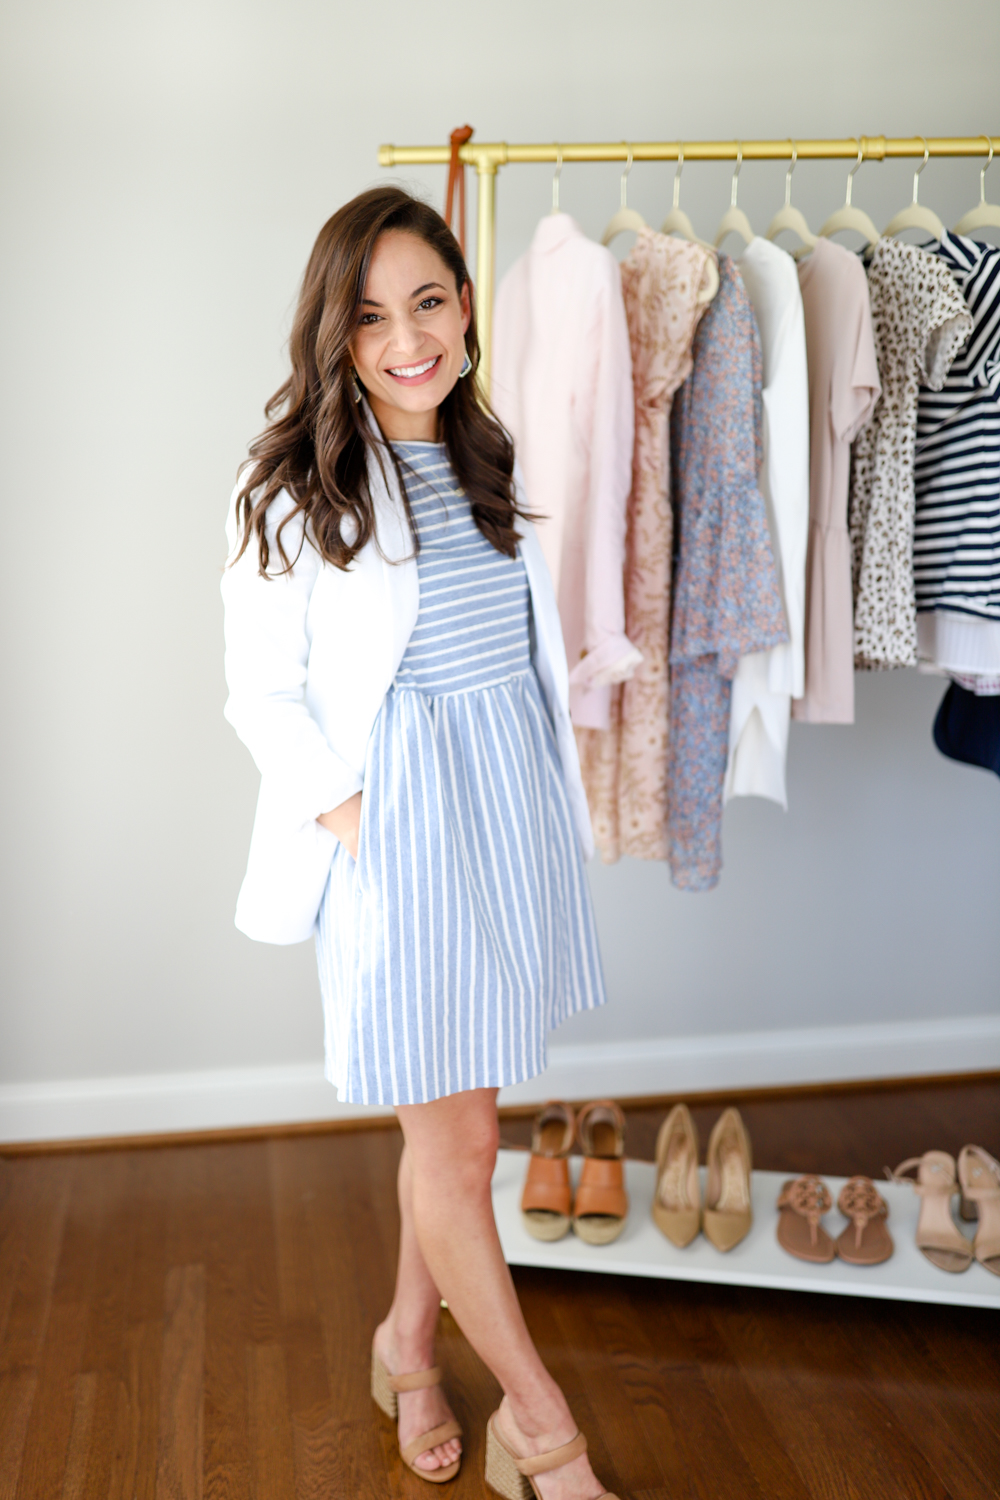 Discover the Top Petite Clothing Stores and Brands